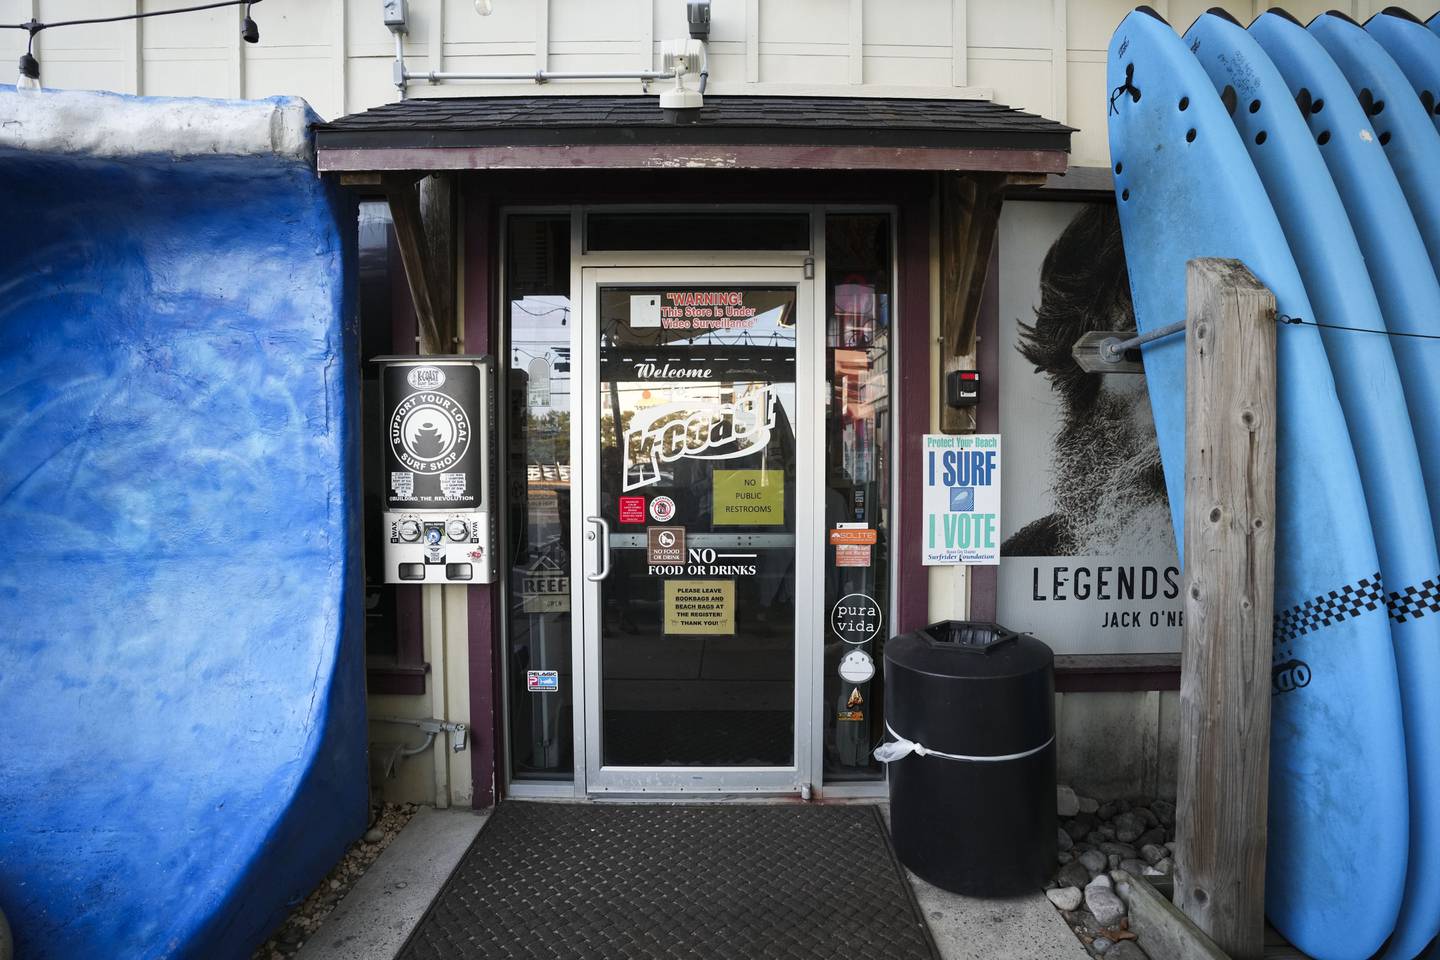 K-Coast Surf Shop was a popular place that Gavin Knupp frequented before his death.